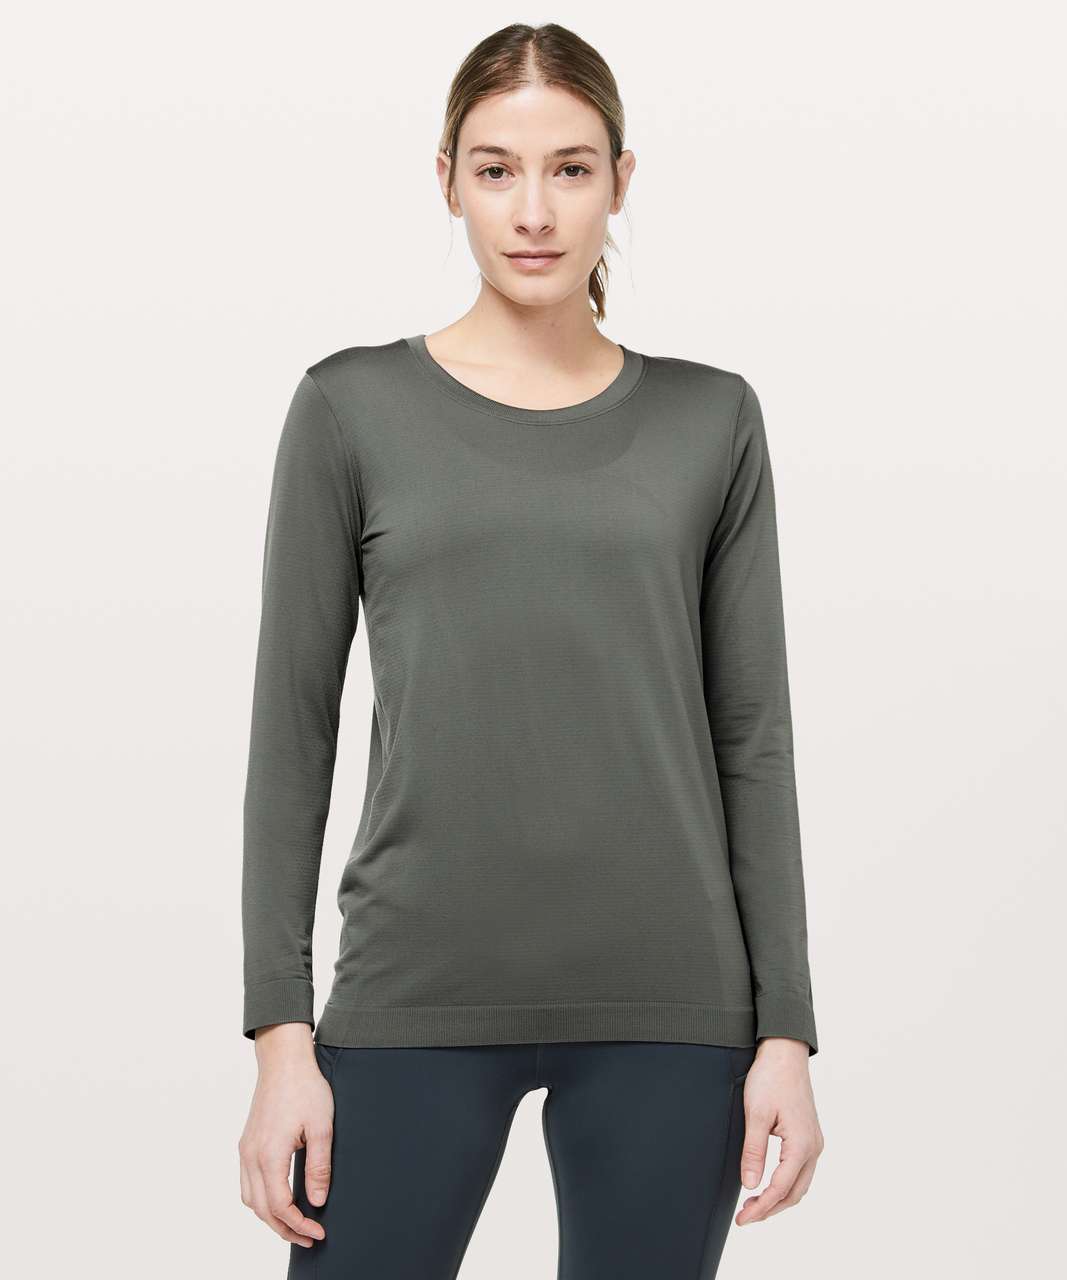 Lululemon Swiftly Tech Long Sleeve (Breeze) *Relaxed Fit - Grey Sage / Grey Sage